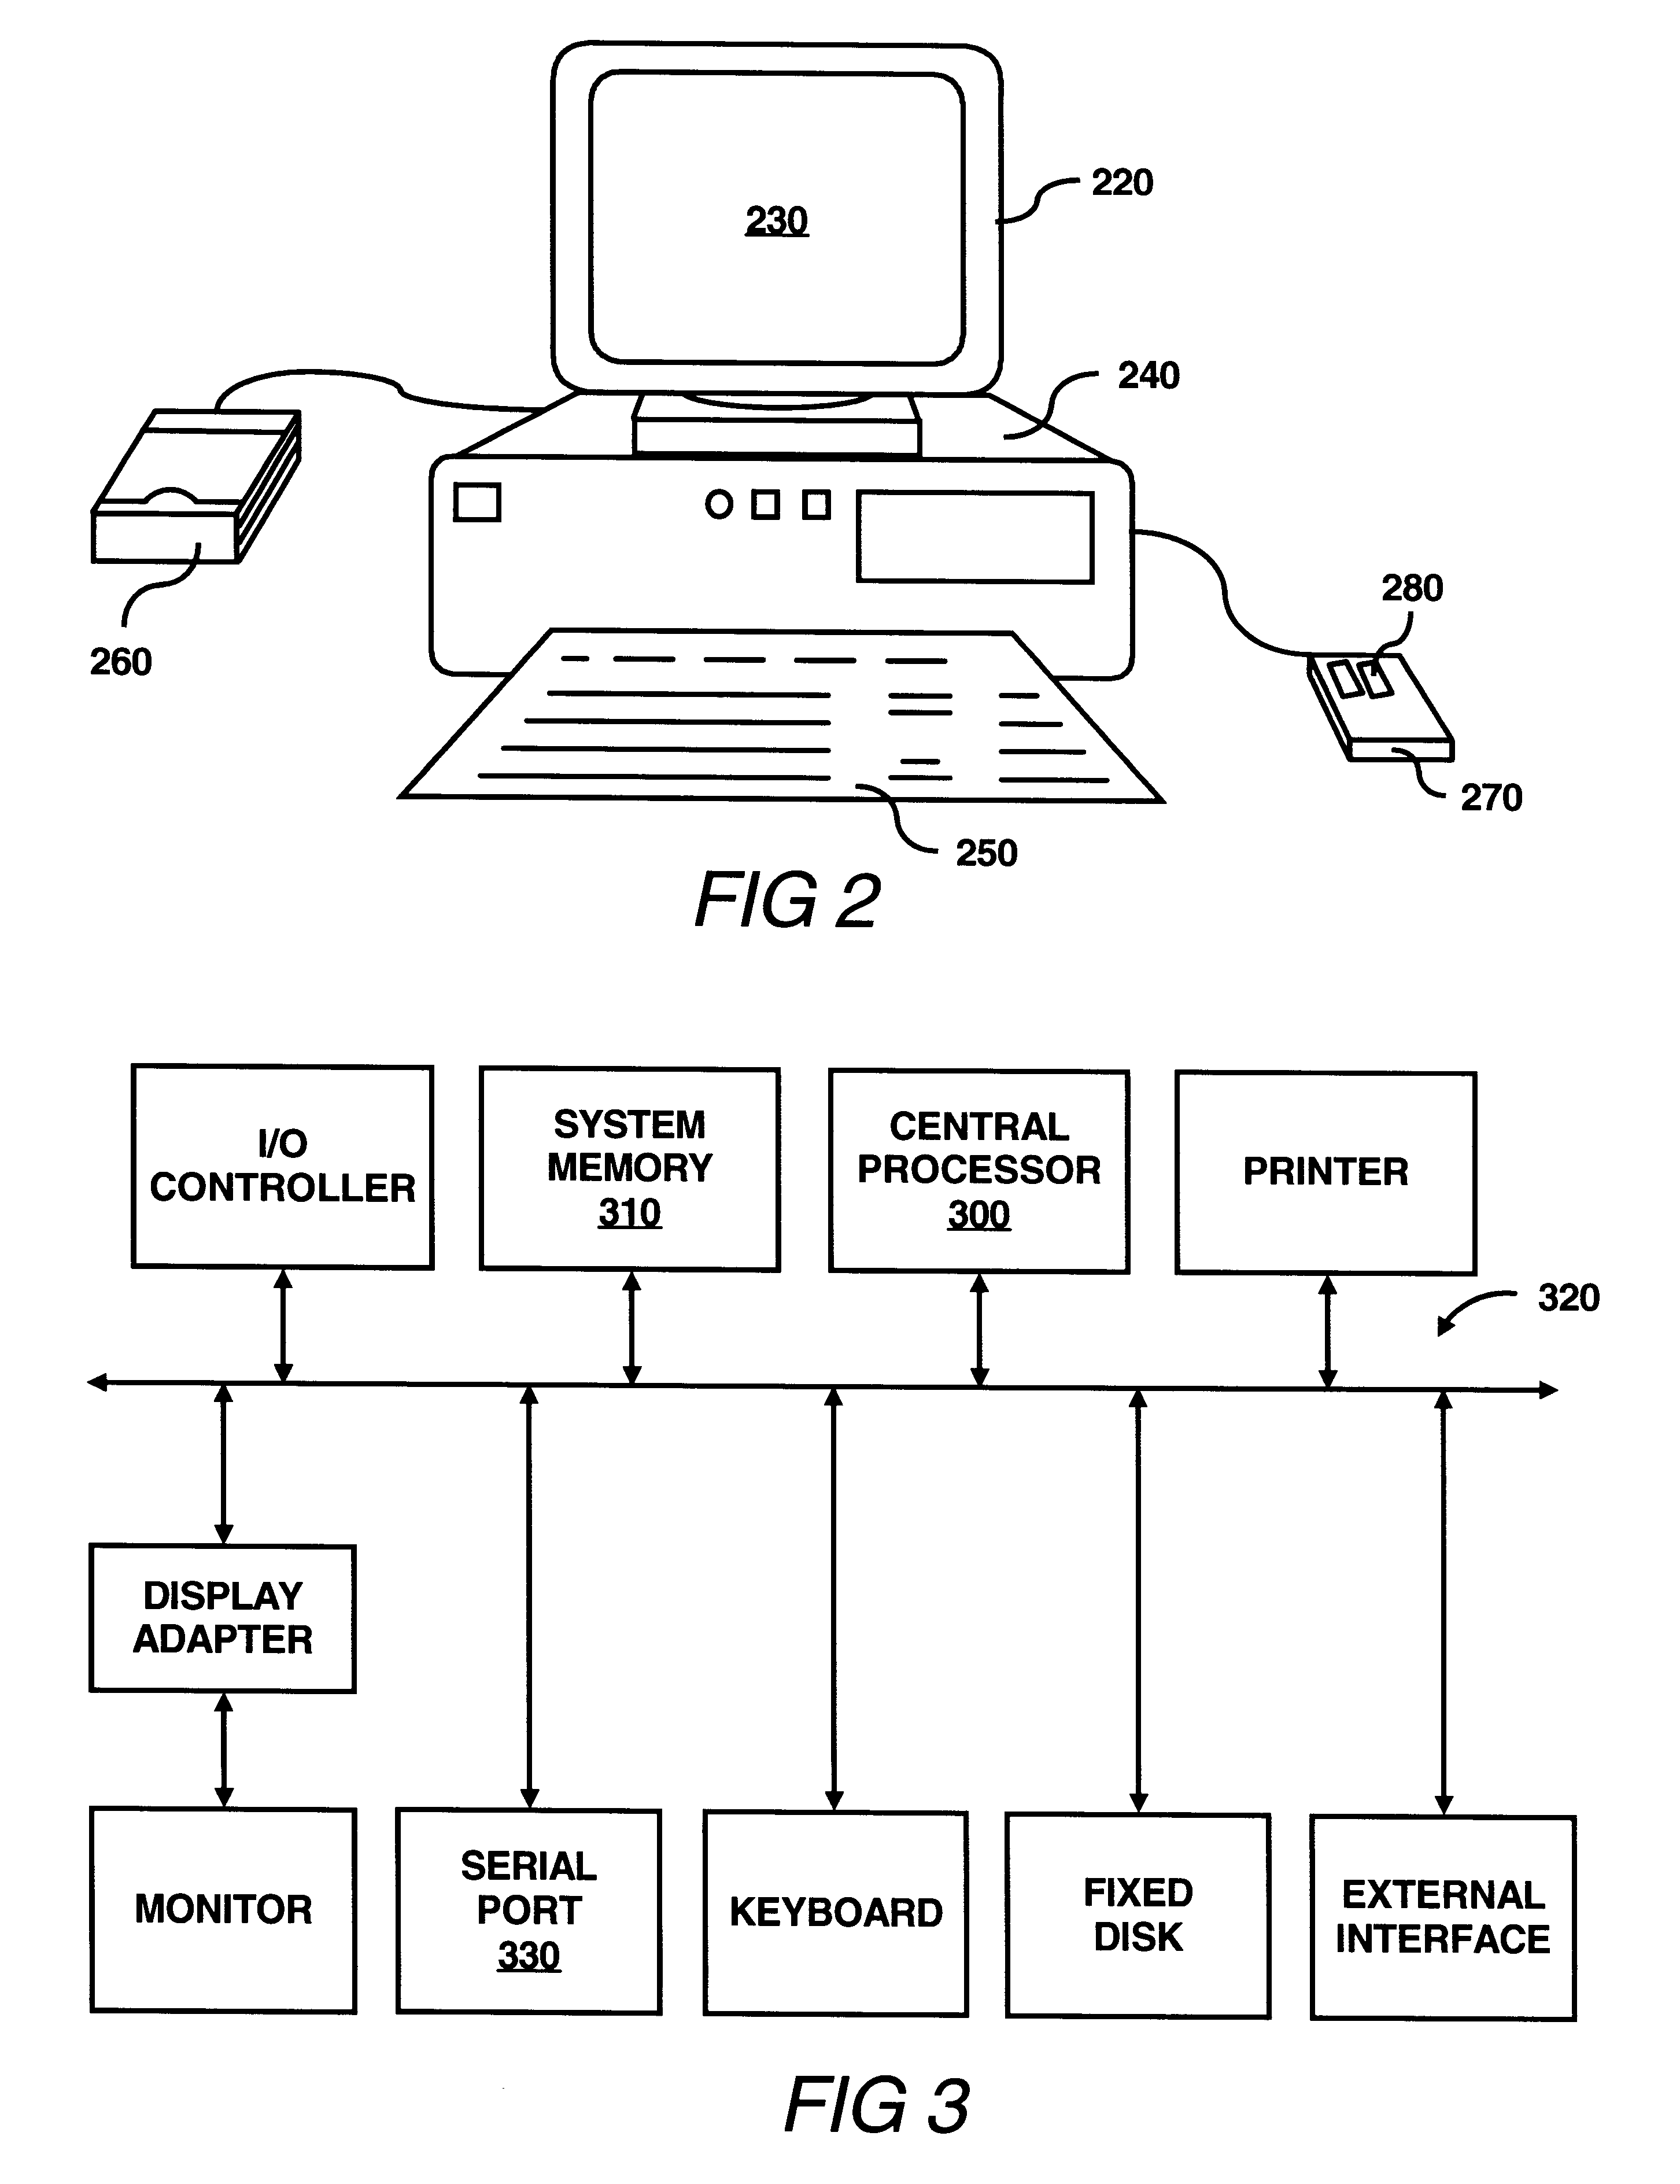 Apparatus for providing instant vendor notification in an electronic commerce network environment